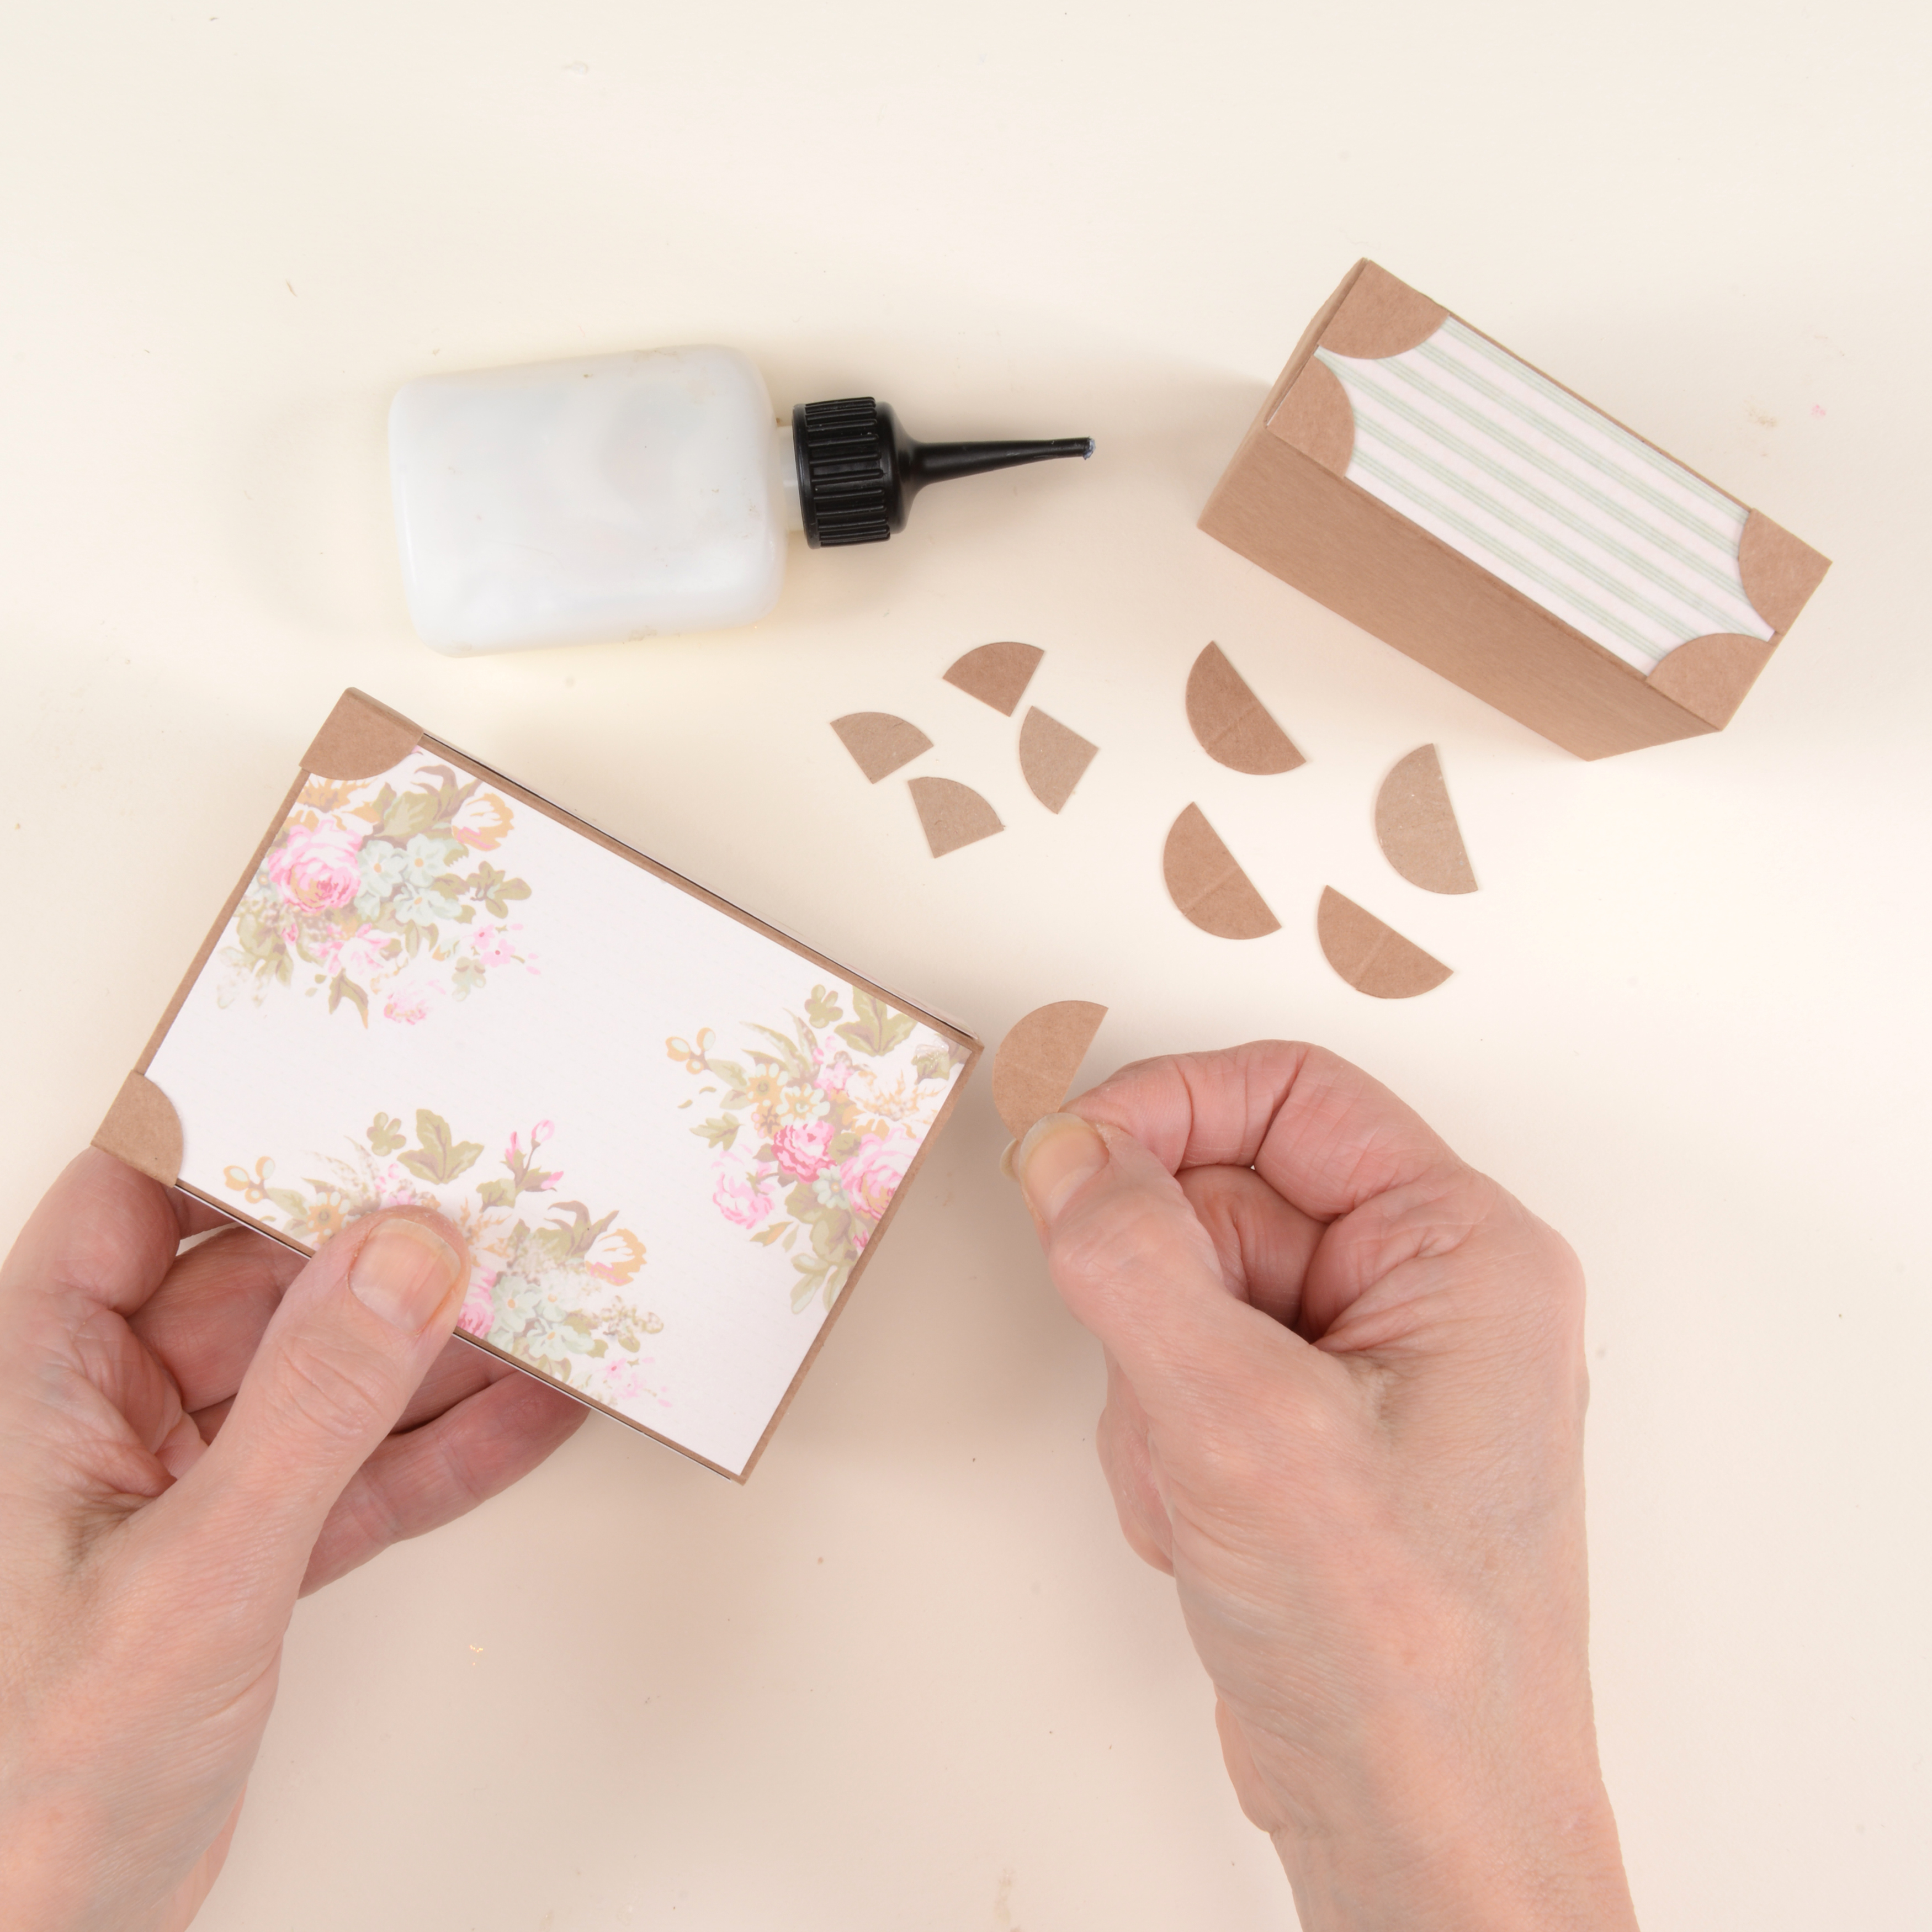 Make a suitcase gift box out of paper